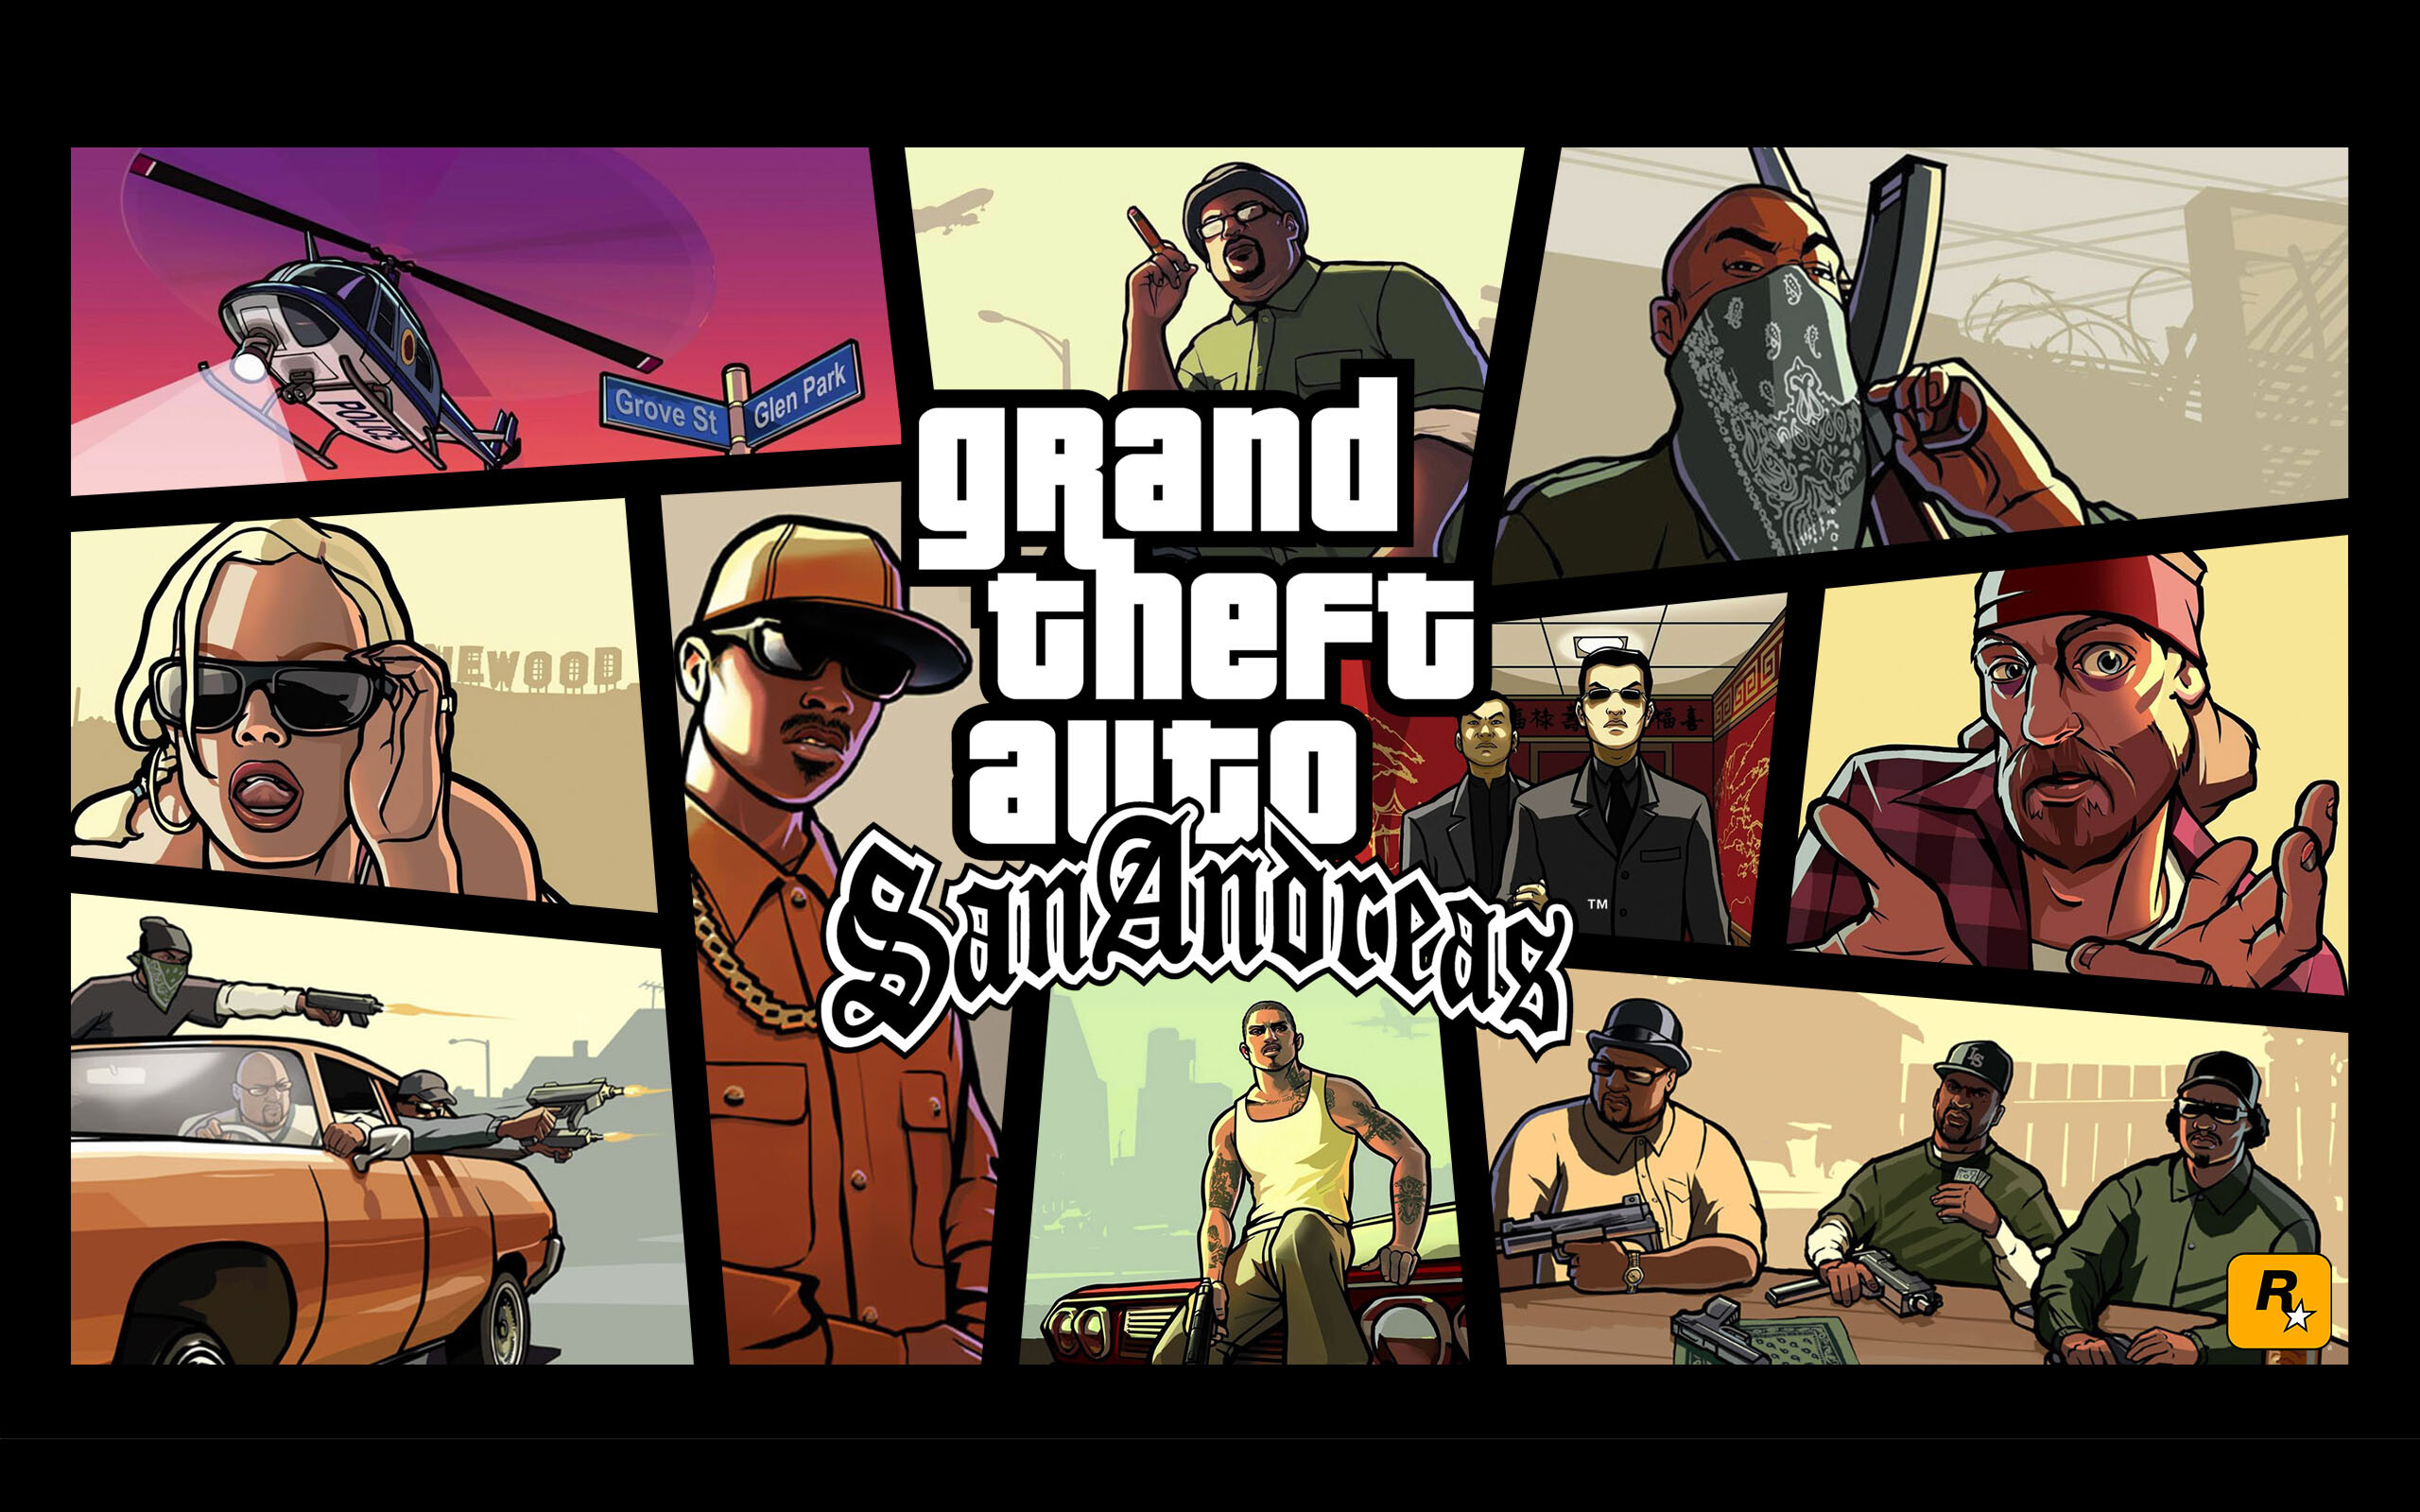 Grand Theft Auto: San Andreas: GTA SA, Considered to be one of the greatest video games ever made. 2560x1600 HD Background.